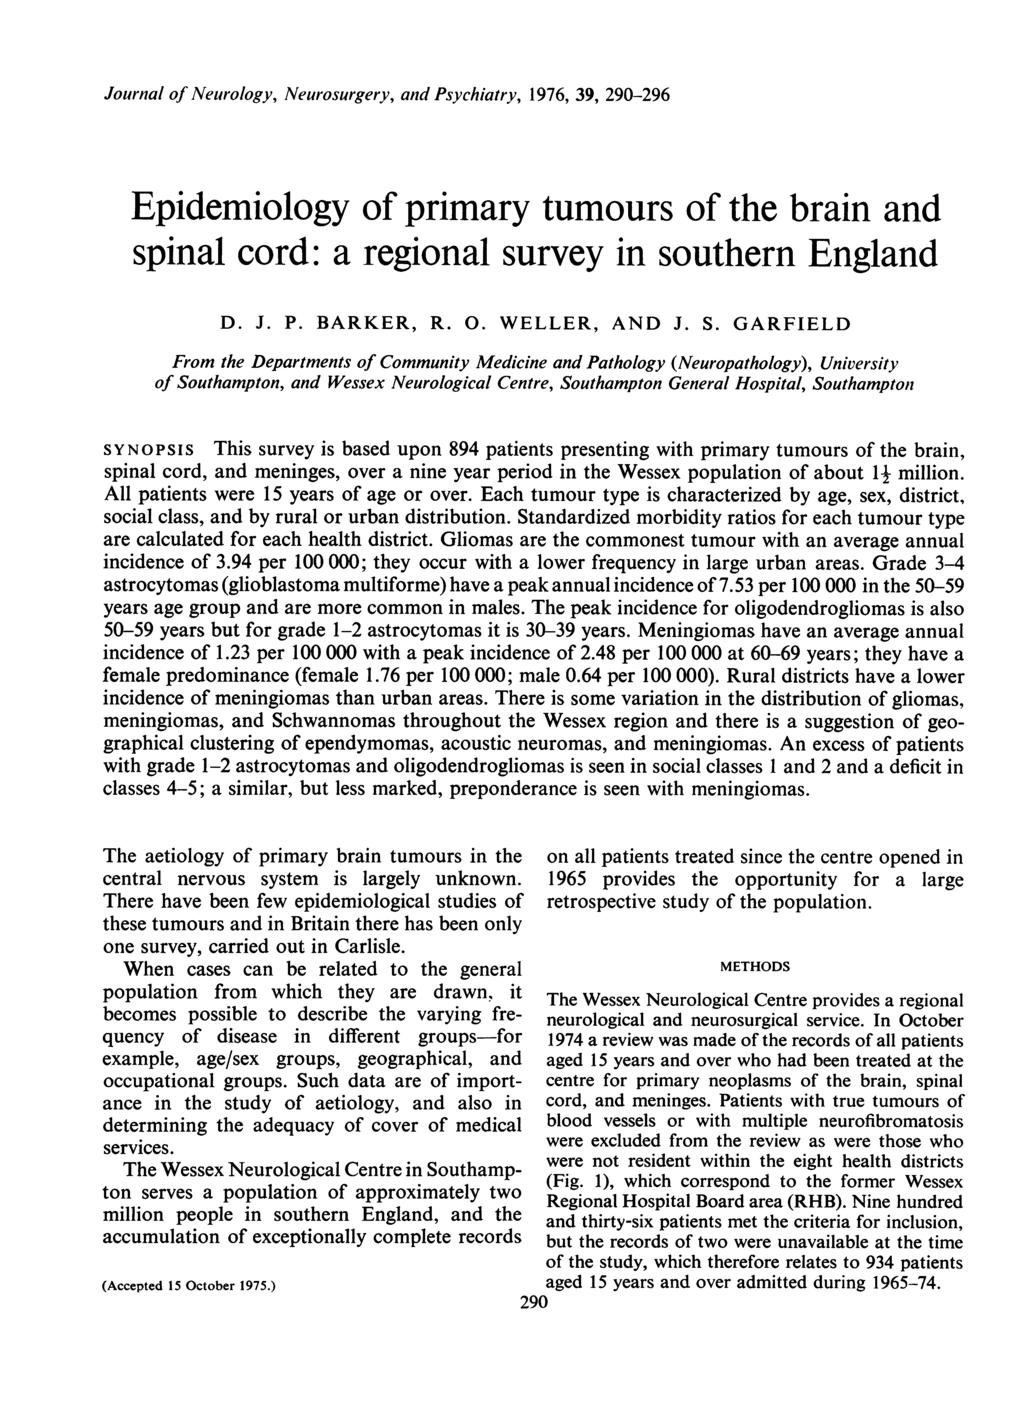 Journal of Neurology, Neurosurgery, and Psychiatry, 1976, 39, 290-296 Epidemiology of primary tumours of the brain and spinal cord: a regional survey in southern England D. J. P. BARKER, R. 0.